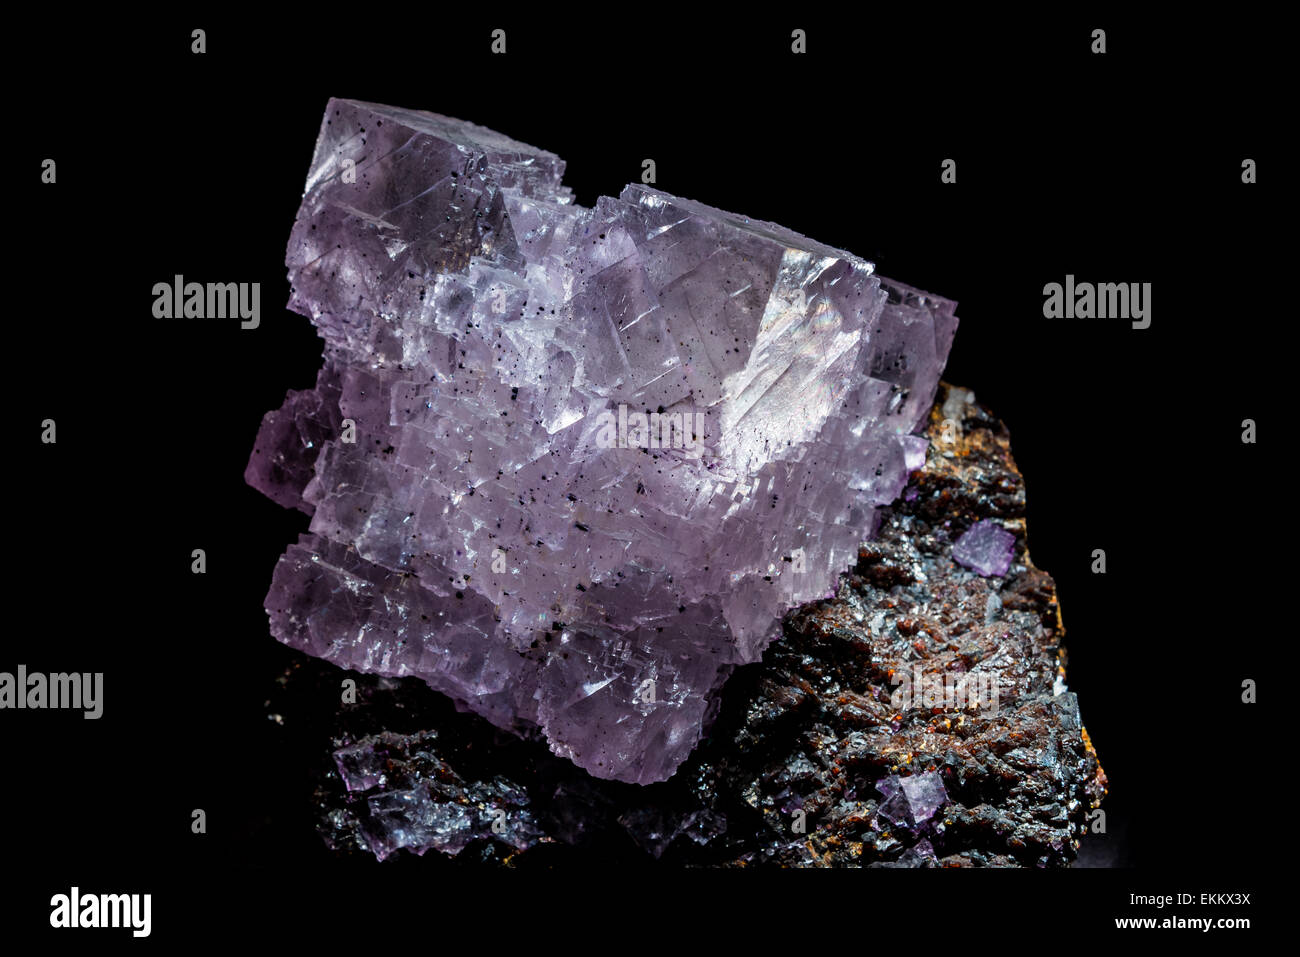 Cubic crystal of mineral Fluorite, calcium fluoride (CaF2). Stock Photo